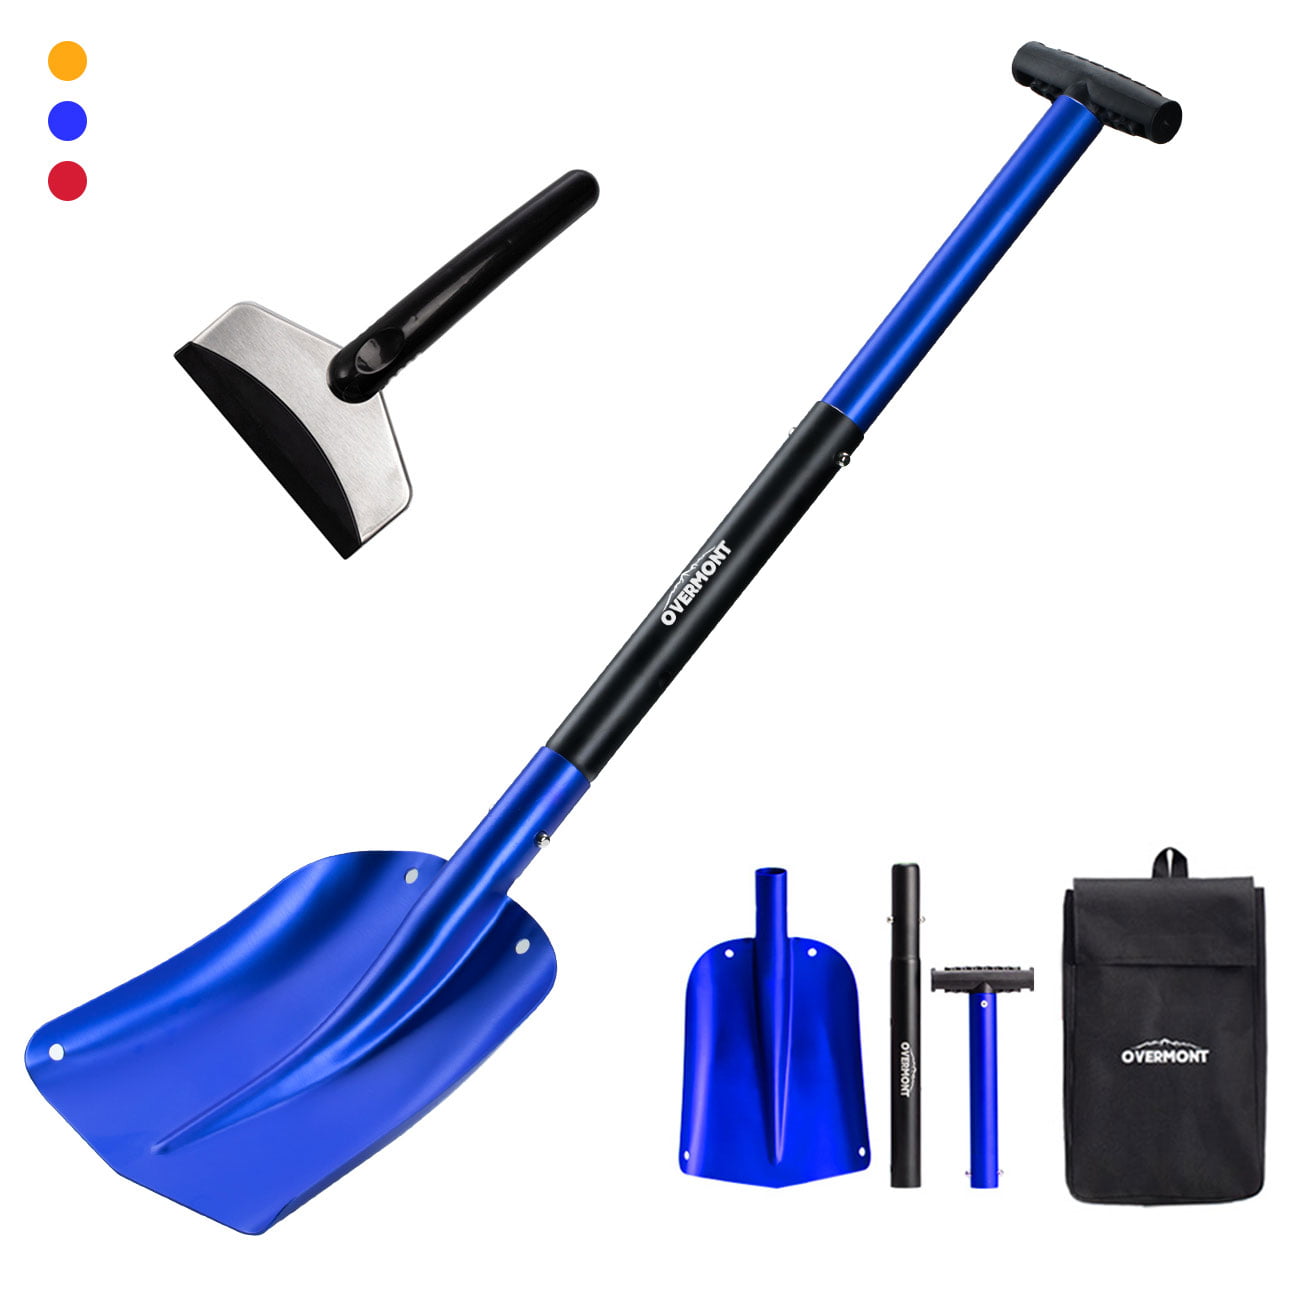 Suitable for Car or Truck Storage Round ORIENTOOLS Collapsible Snow Shovel Lightweight and Durable Aluminum Garden/Sport Utility Shovel 8 Blade 